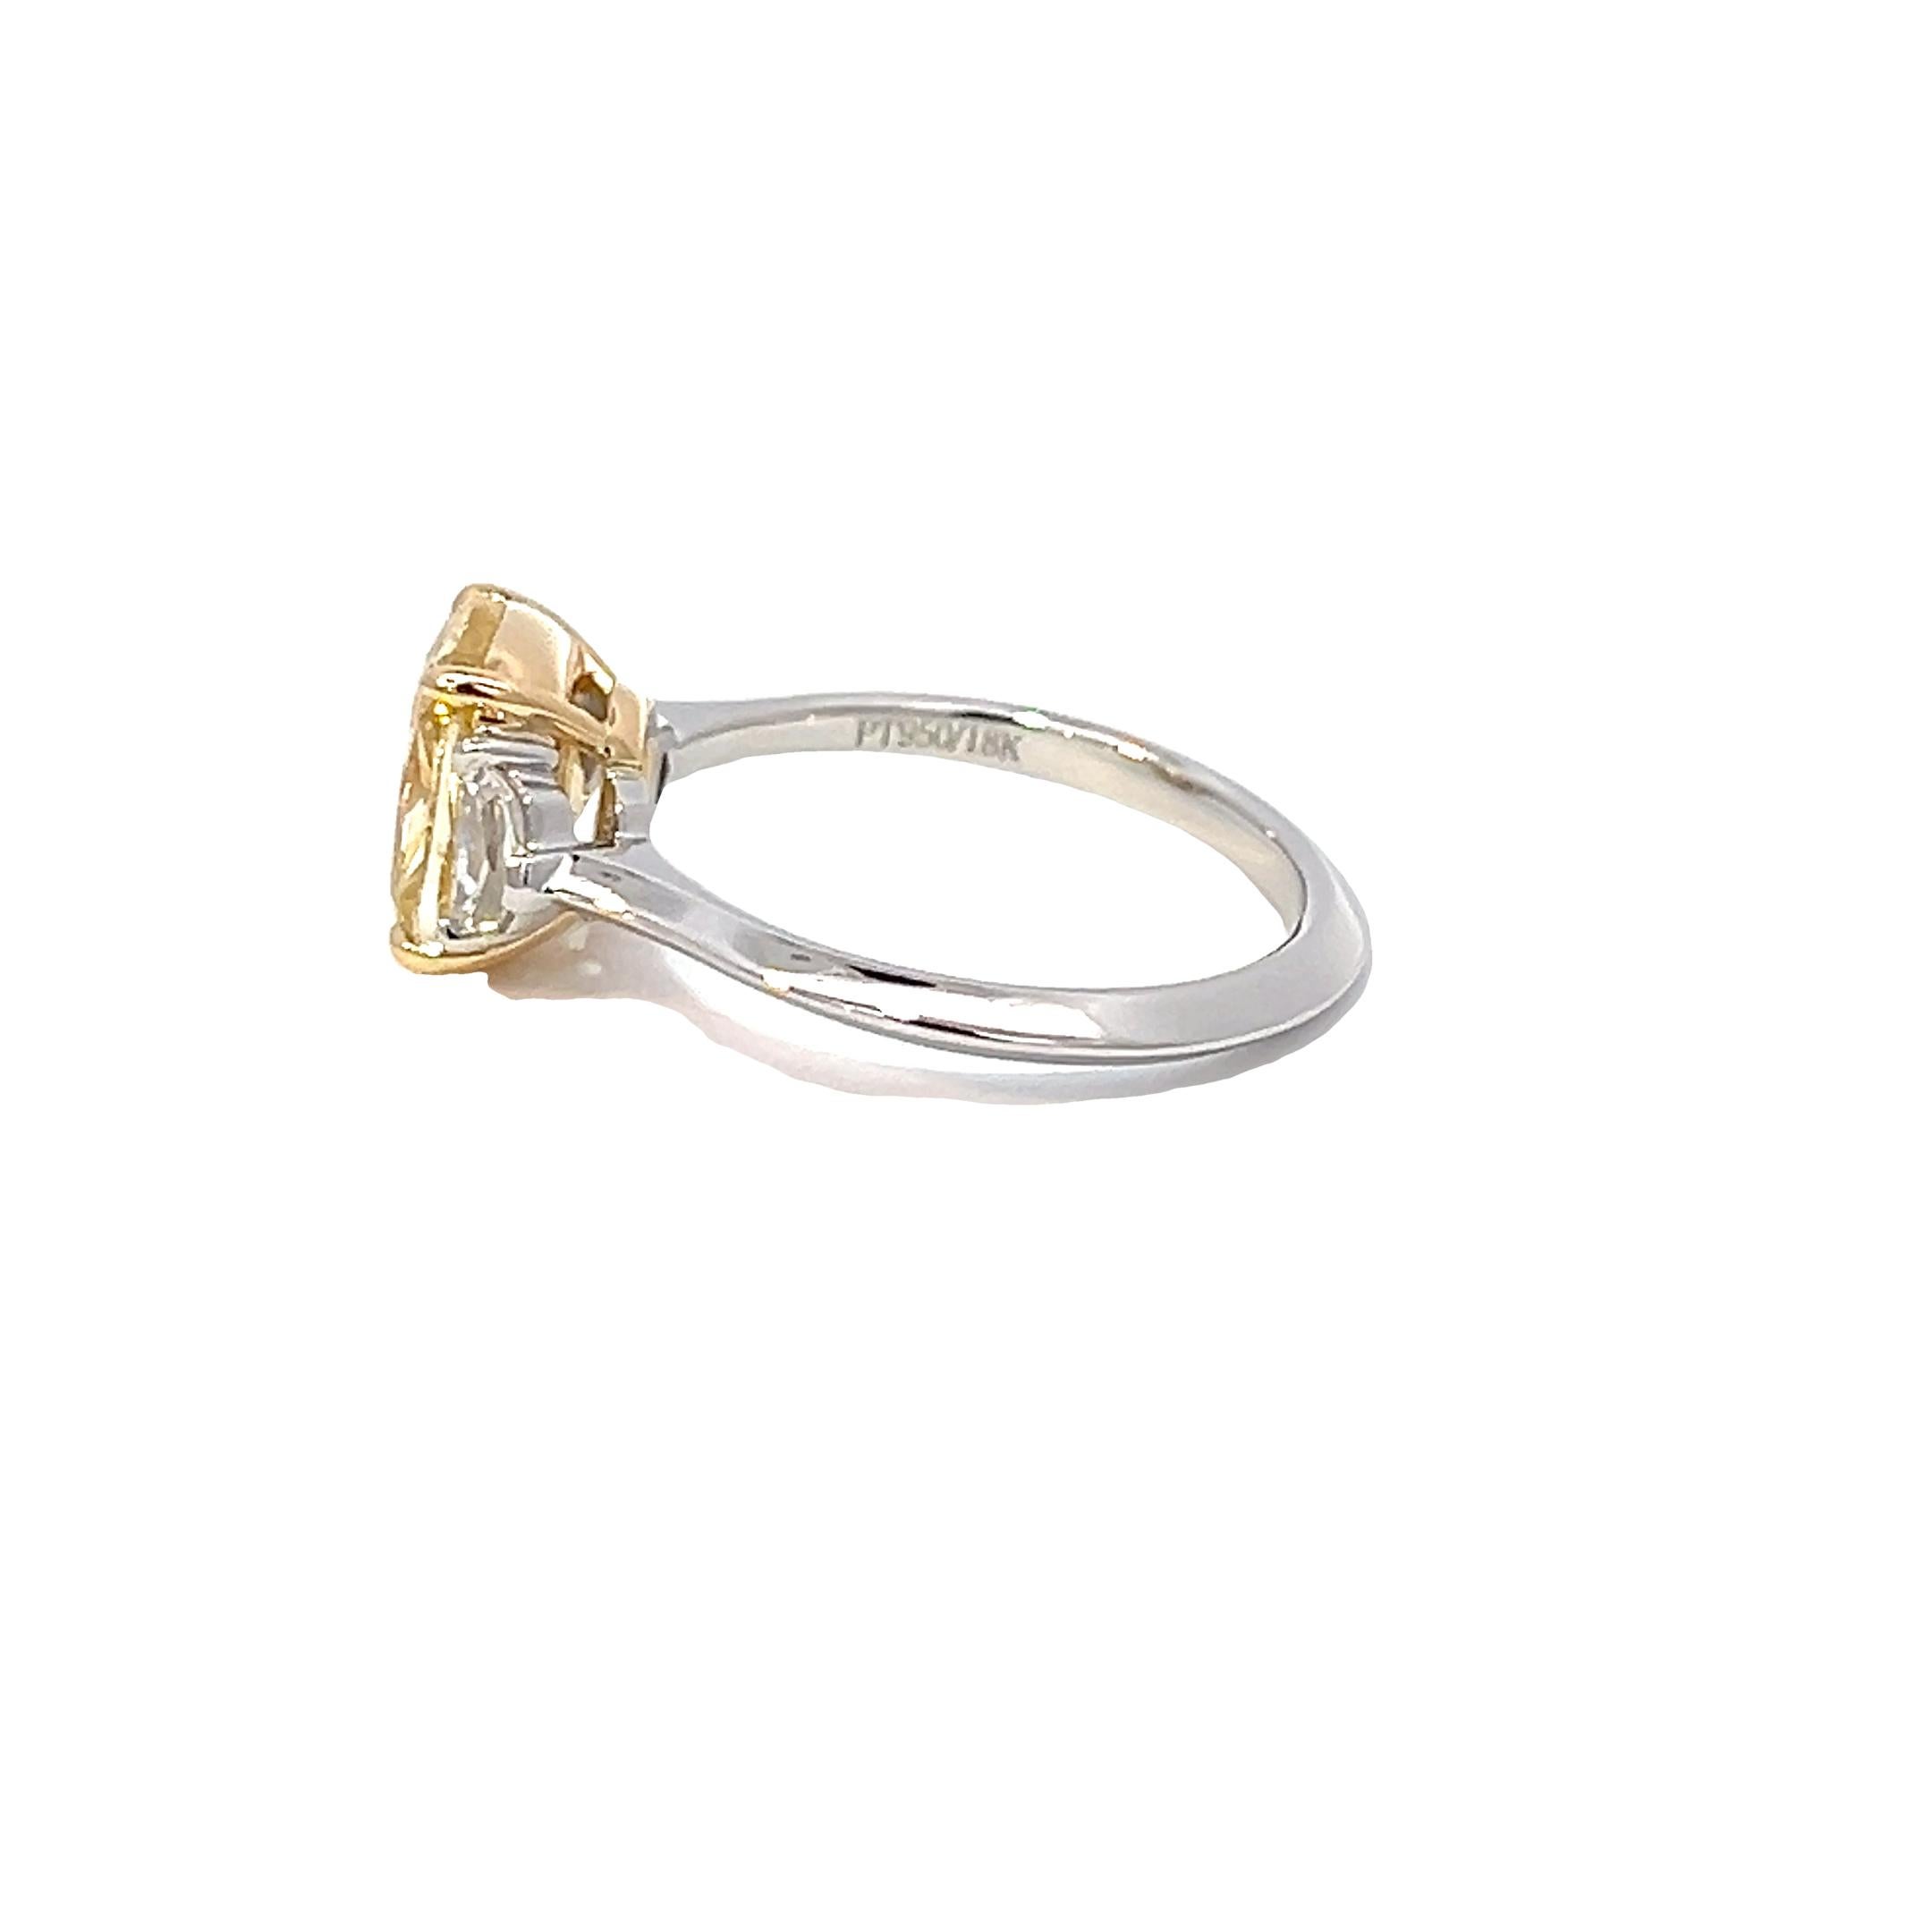 2.85CT Total Weight Fancy Intense Yellow Diamond Ring, GIA Cert For Sale 1